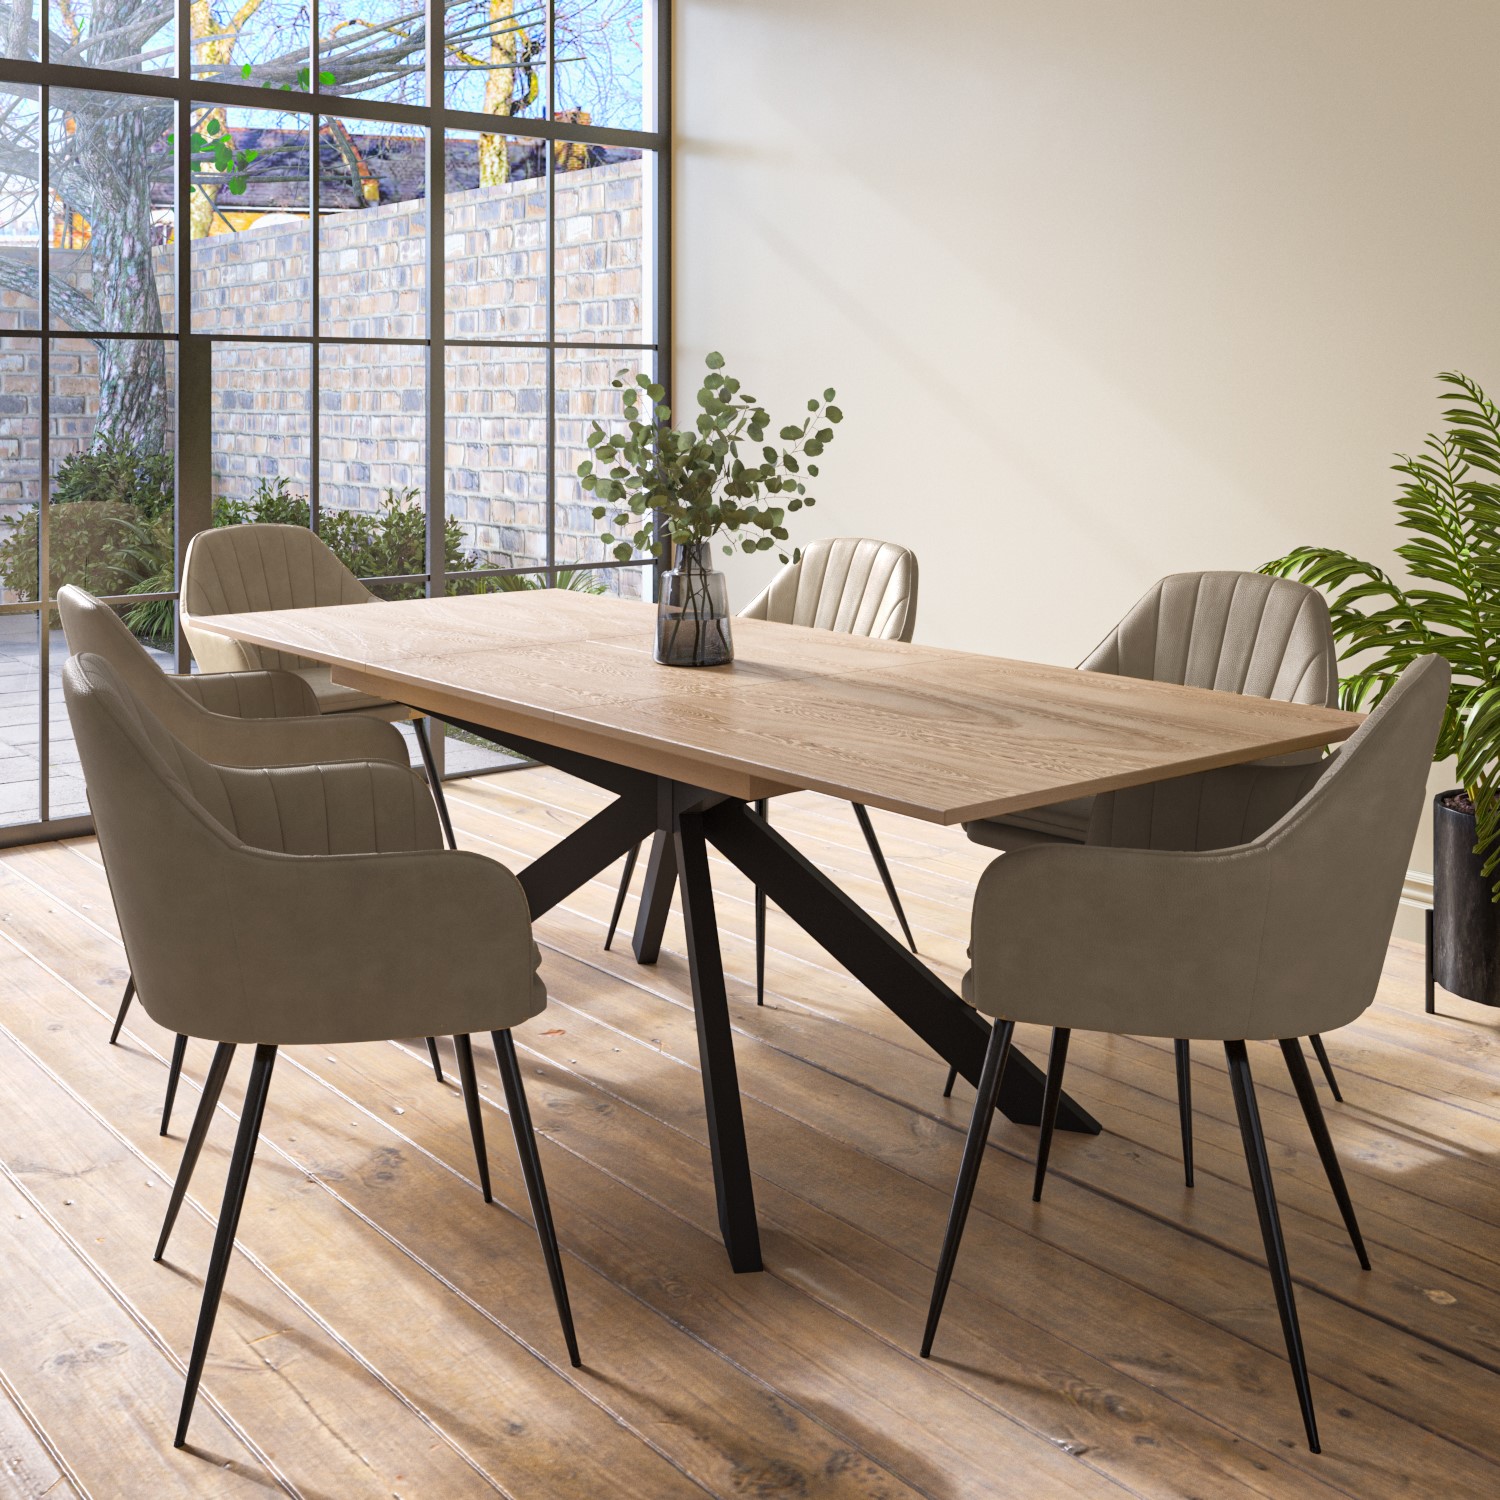 Photo of Extendable oak dining table with 6 beige faux leather dining chairs - carson